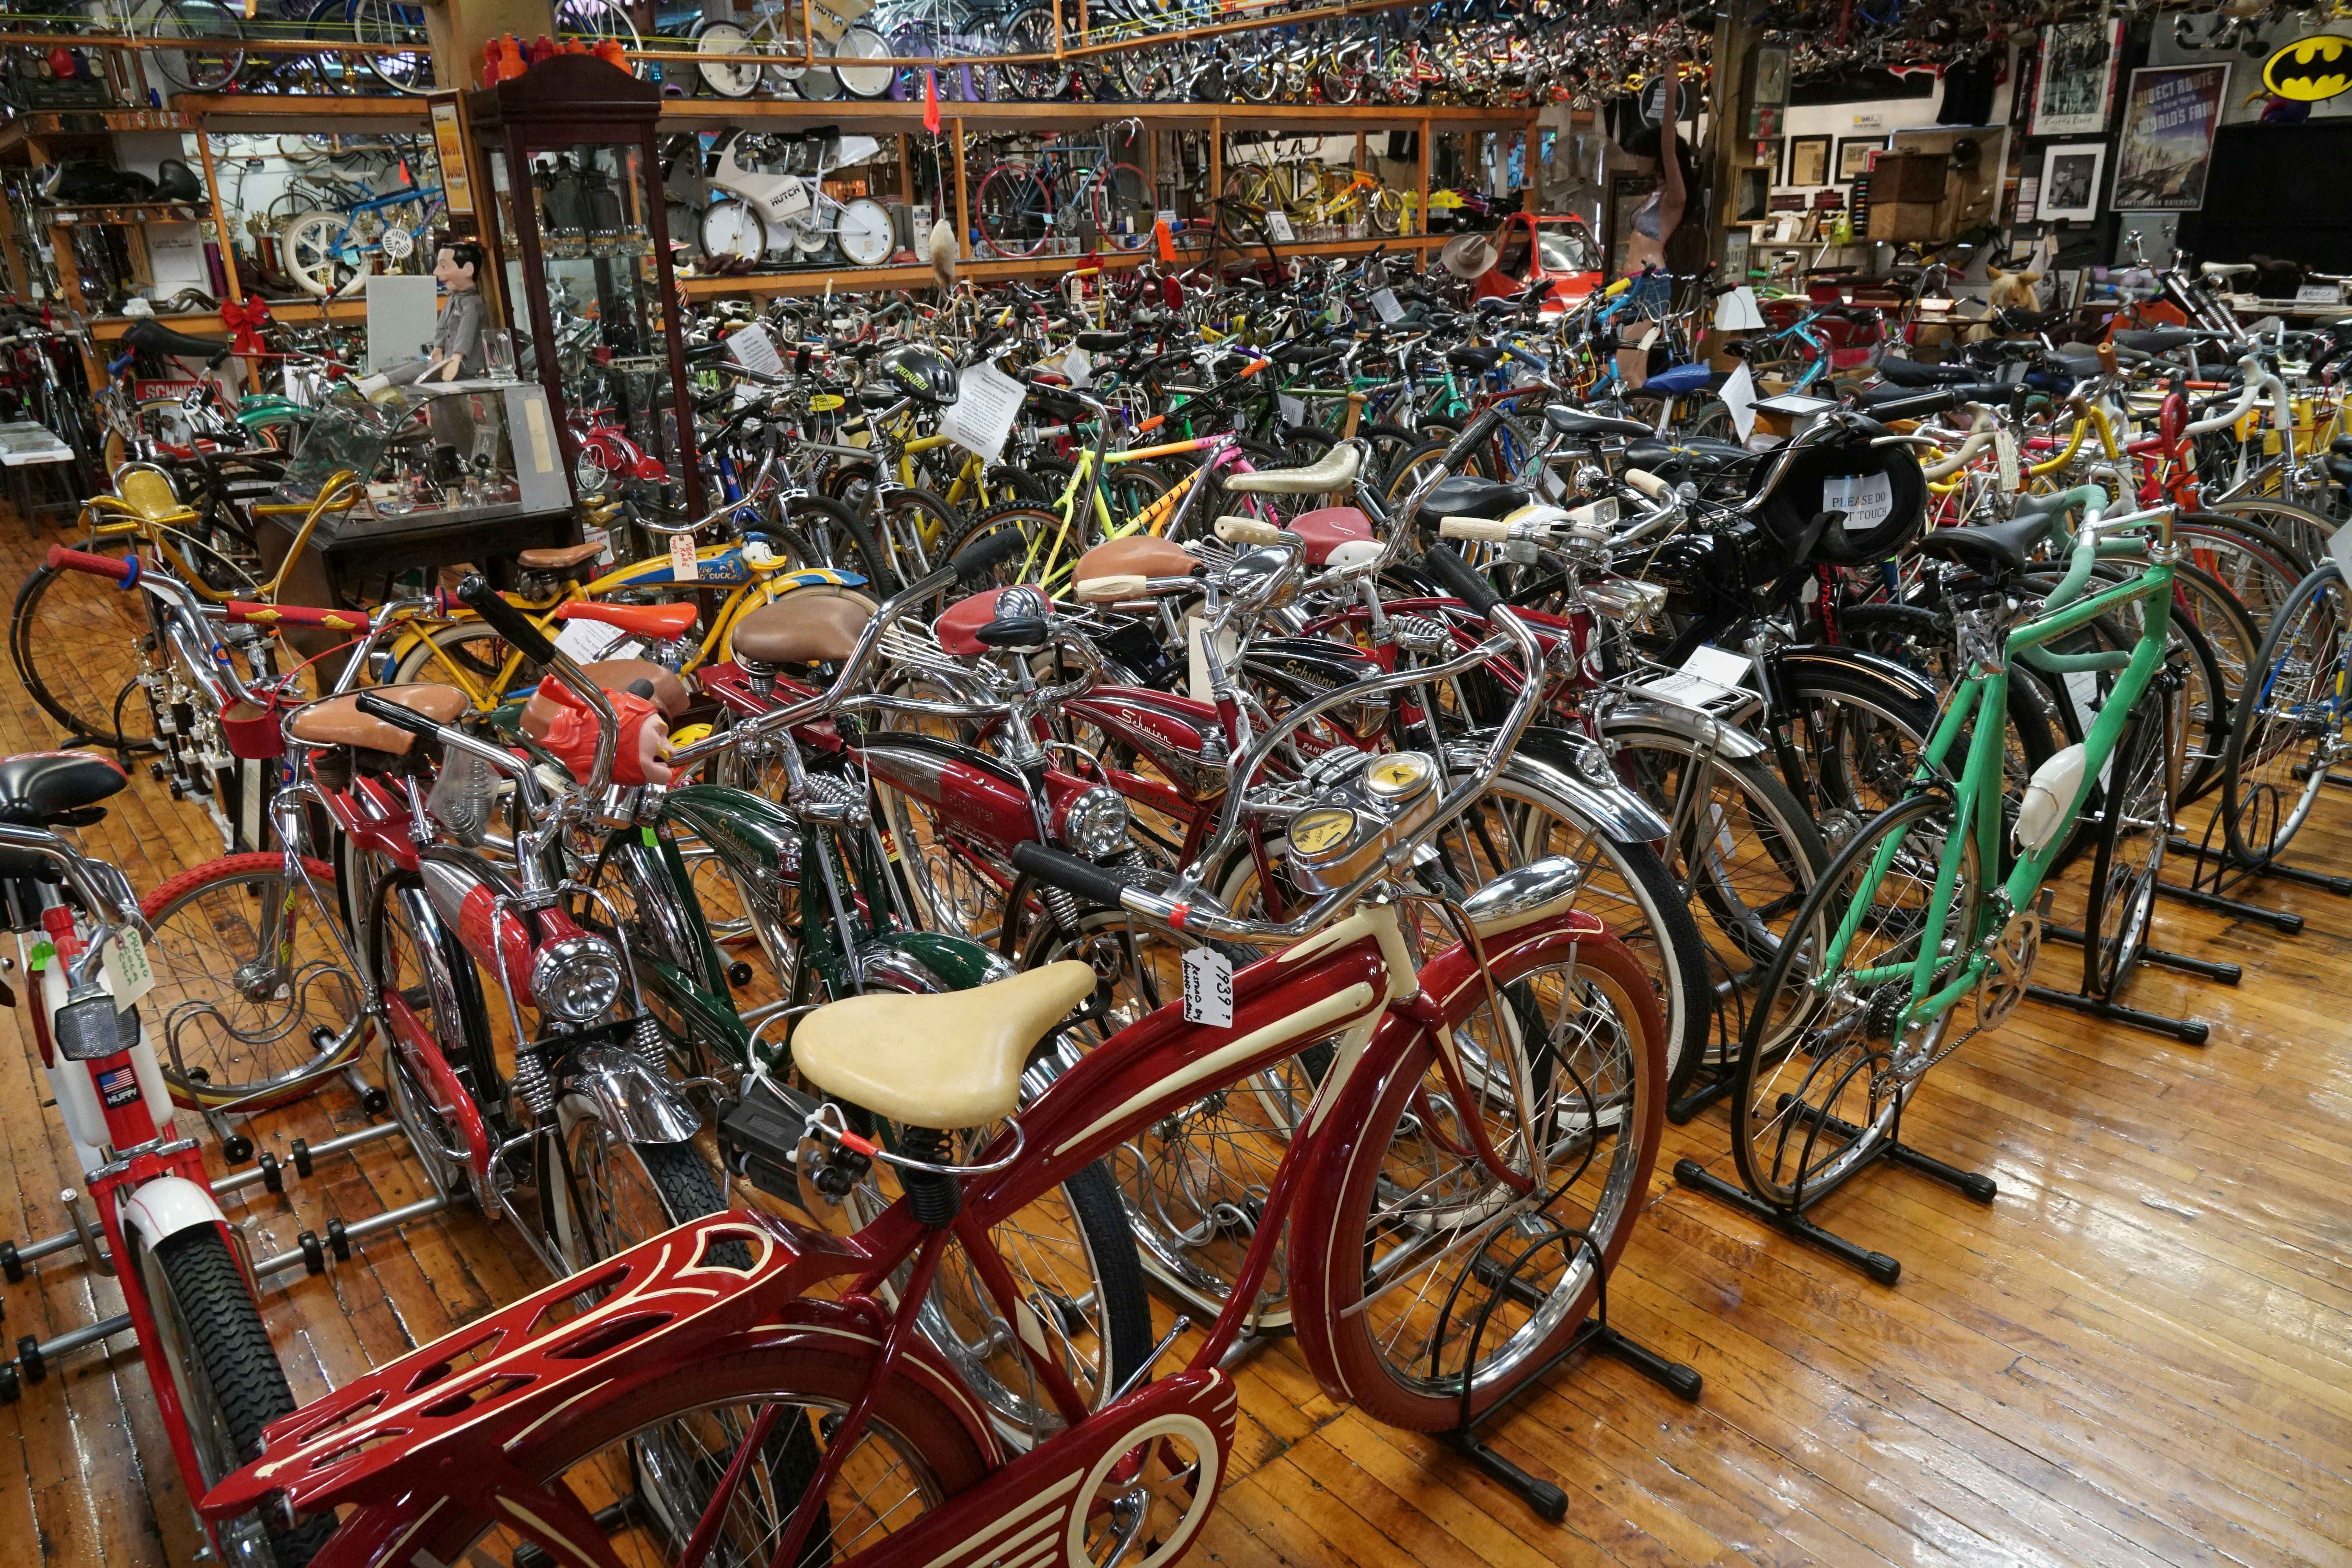 A room with glossy old hardwood floors is crammed with an inconceivable number of bicycles in all colors, shapes and sizes. In the foreground is a red bicycle with a cream seat and a teal one with a narrow, modern frame, but all you can see of the others are a jumble of seats, handlebars, and chrome gleam